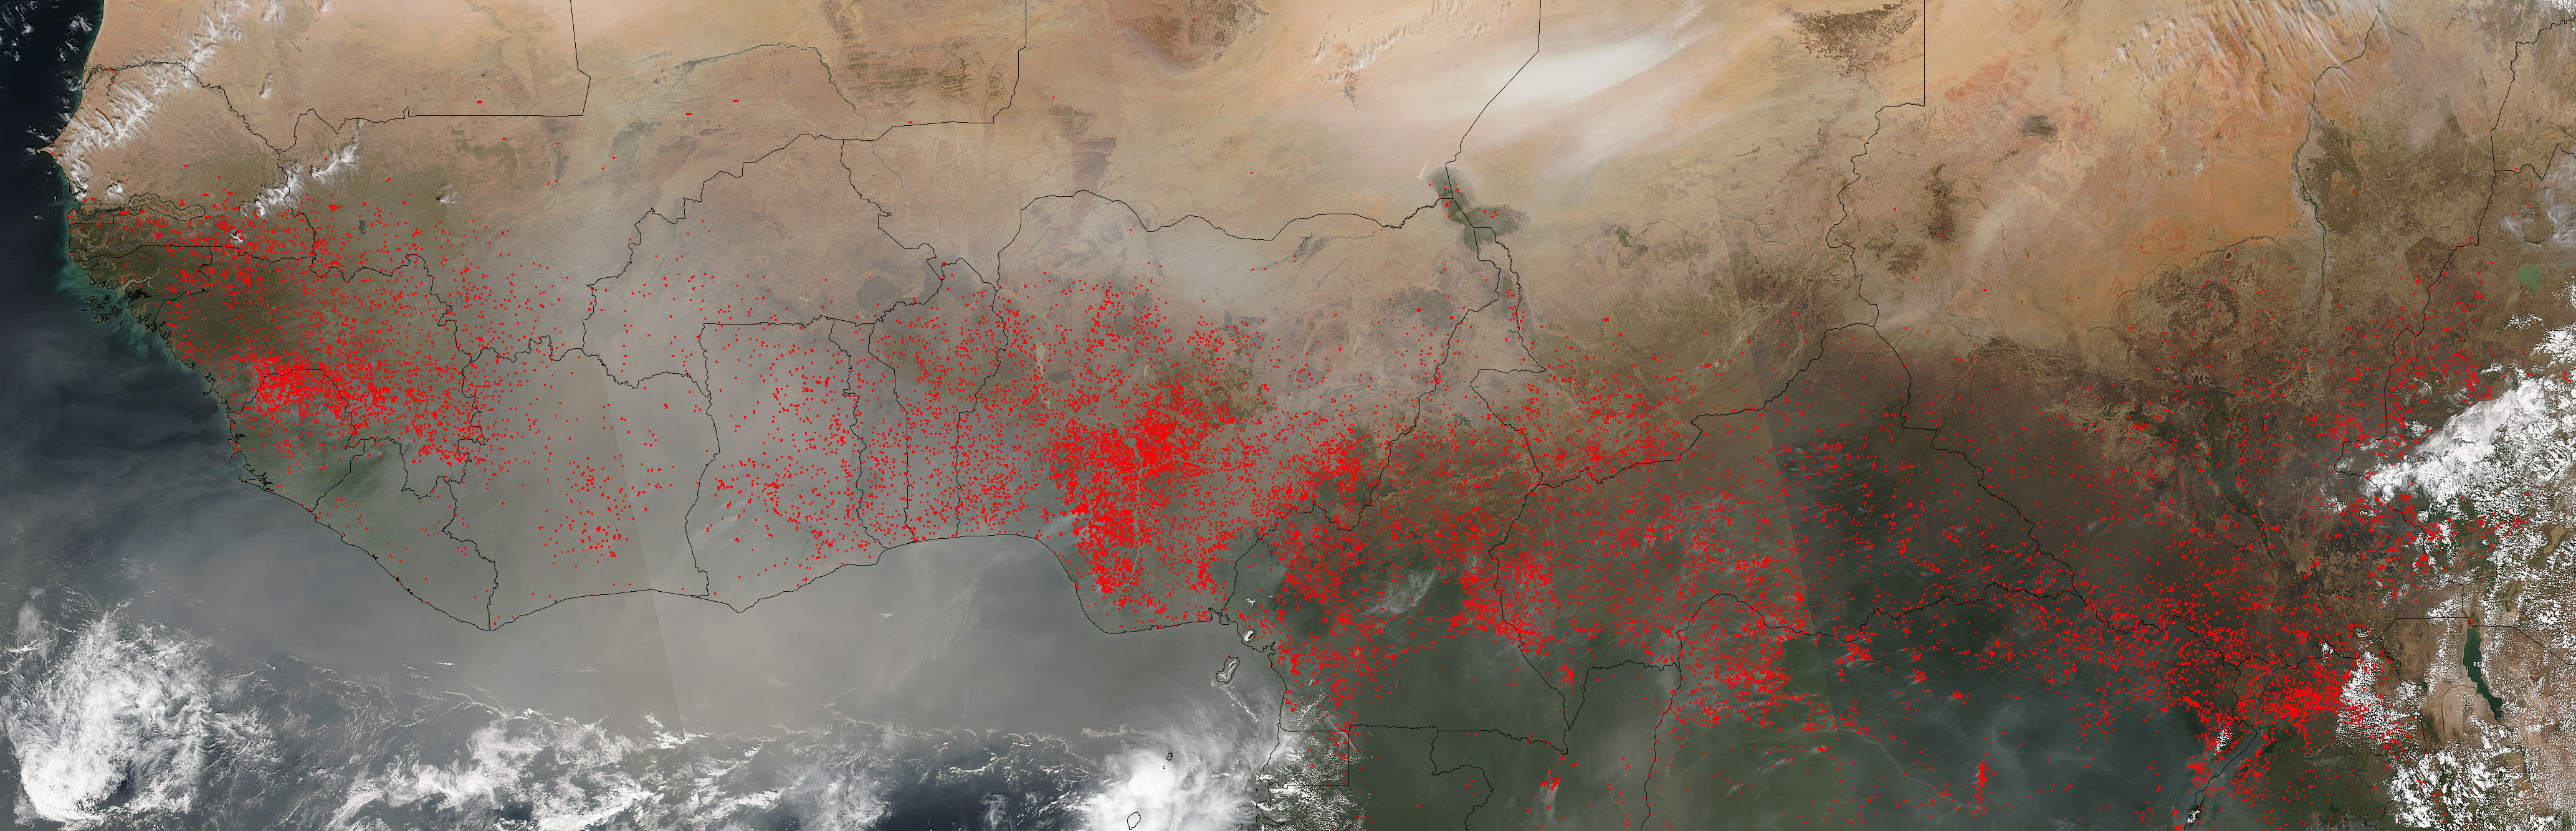 Fires and dust across Central Africa - related image preview